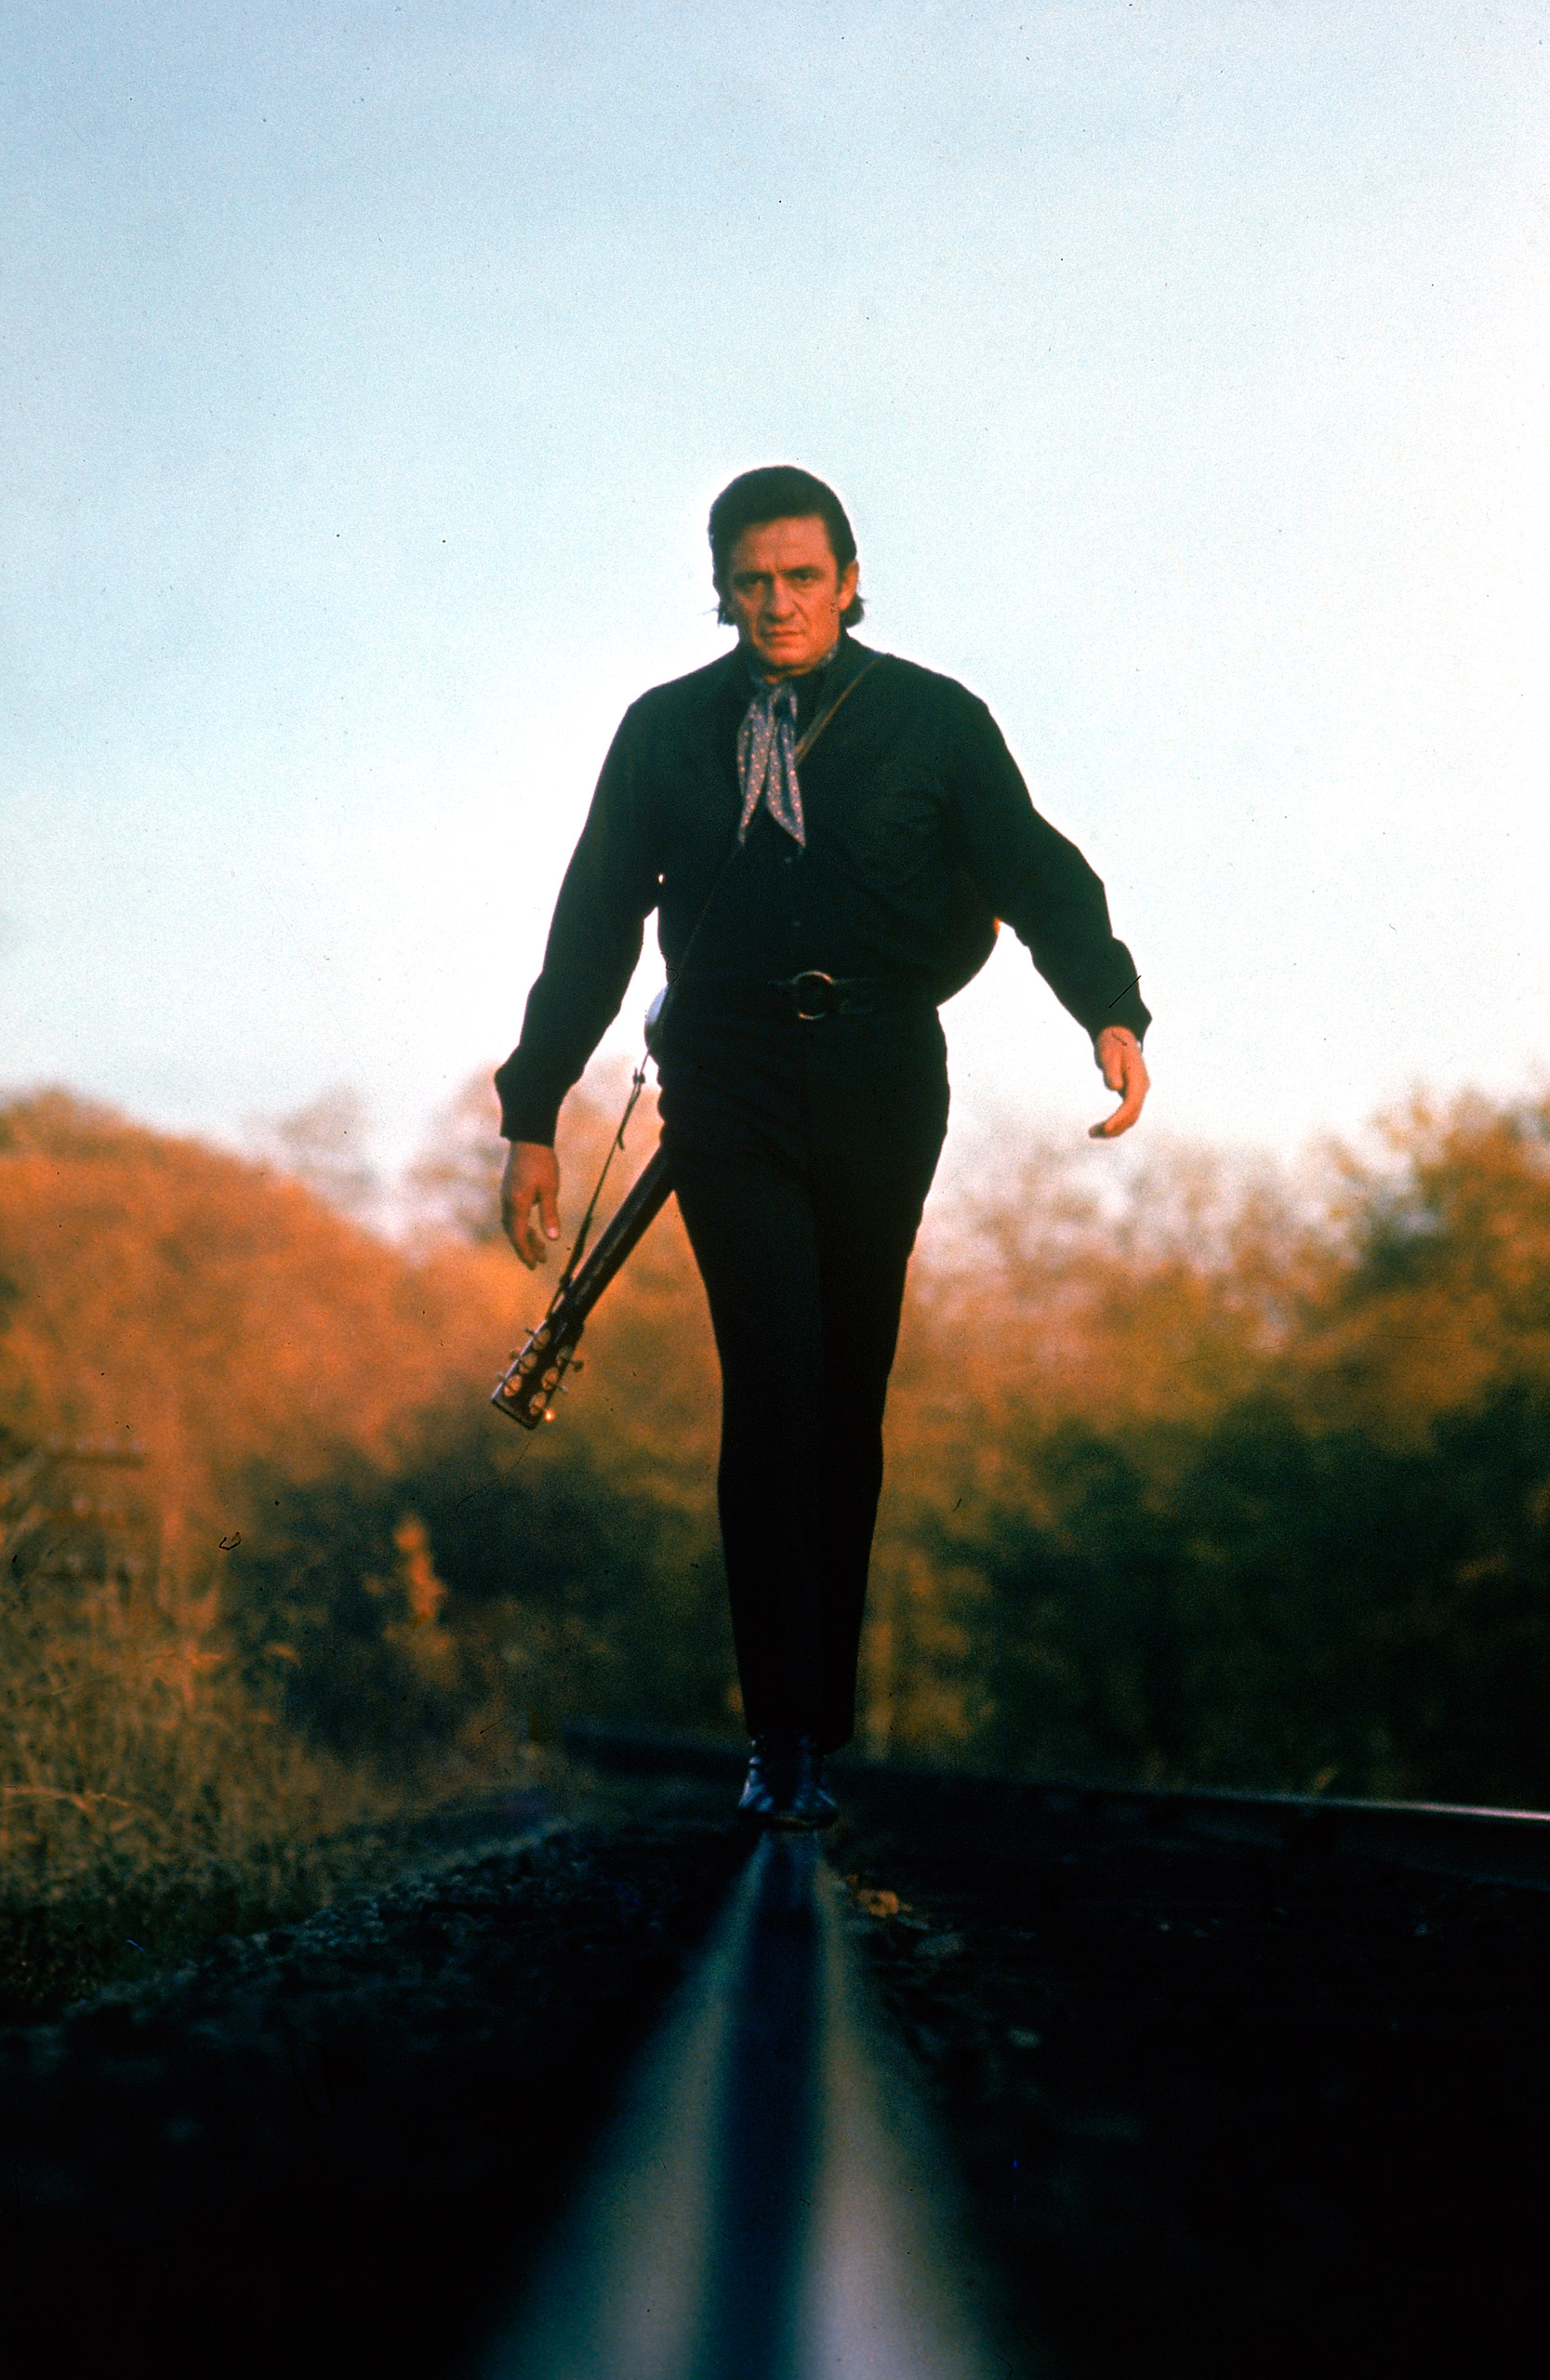 Country music star Johnny Cash walking along the line of a railway track.